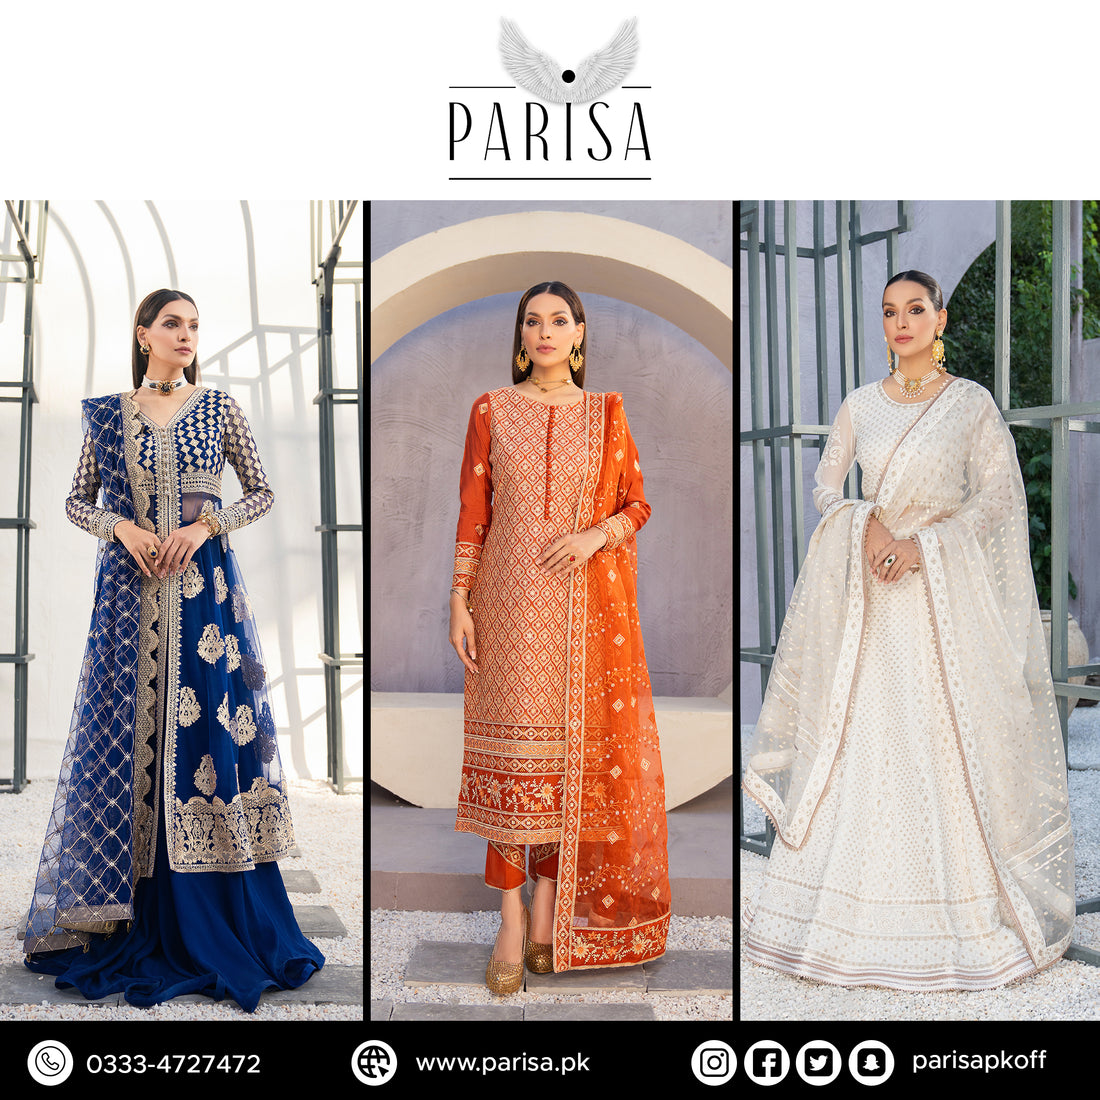 Find A Range Of Eid Clothes From Parisa Clothing Brand In Pakistan